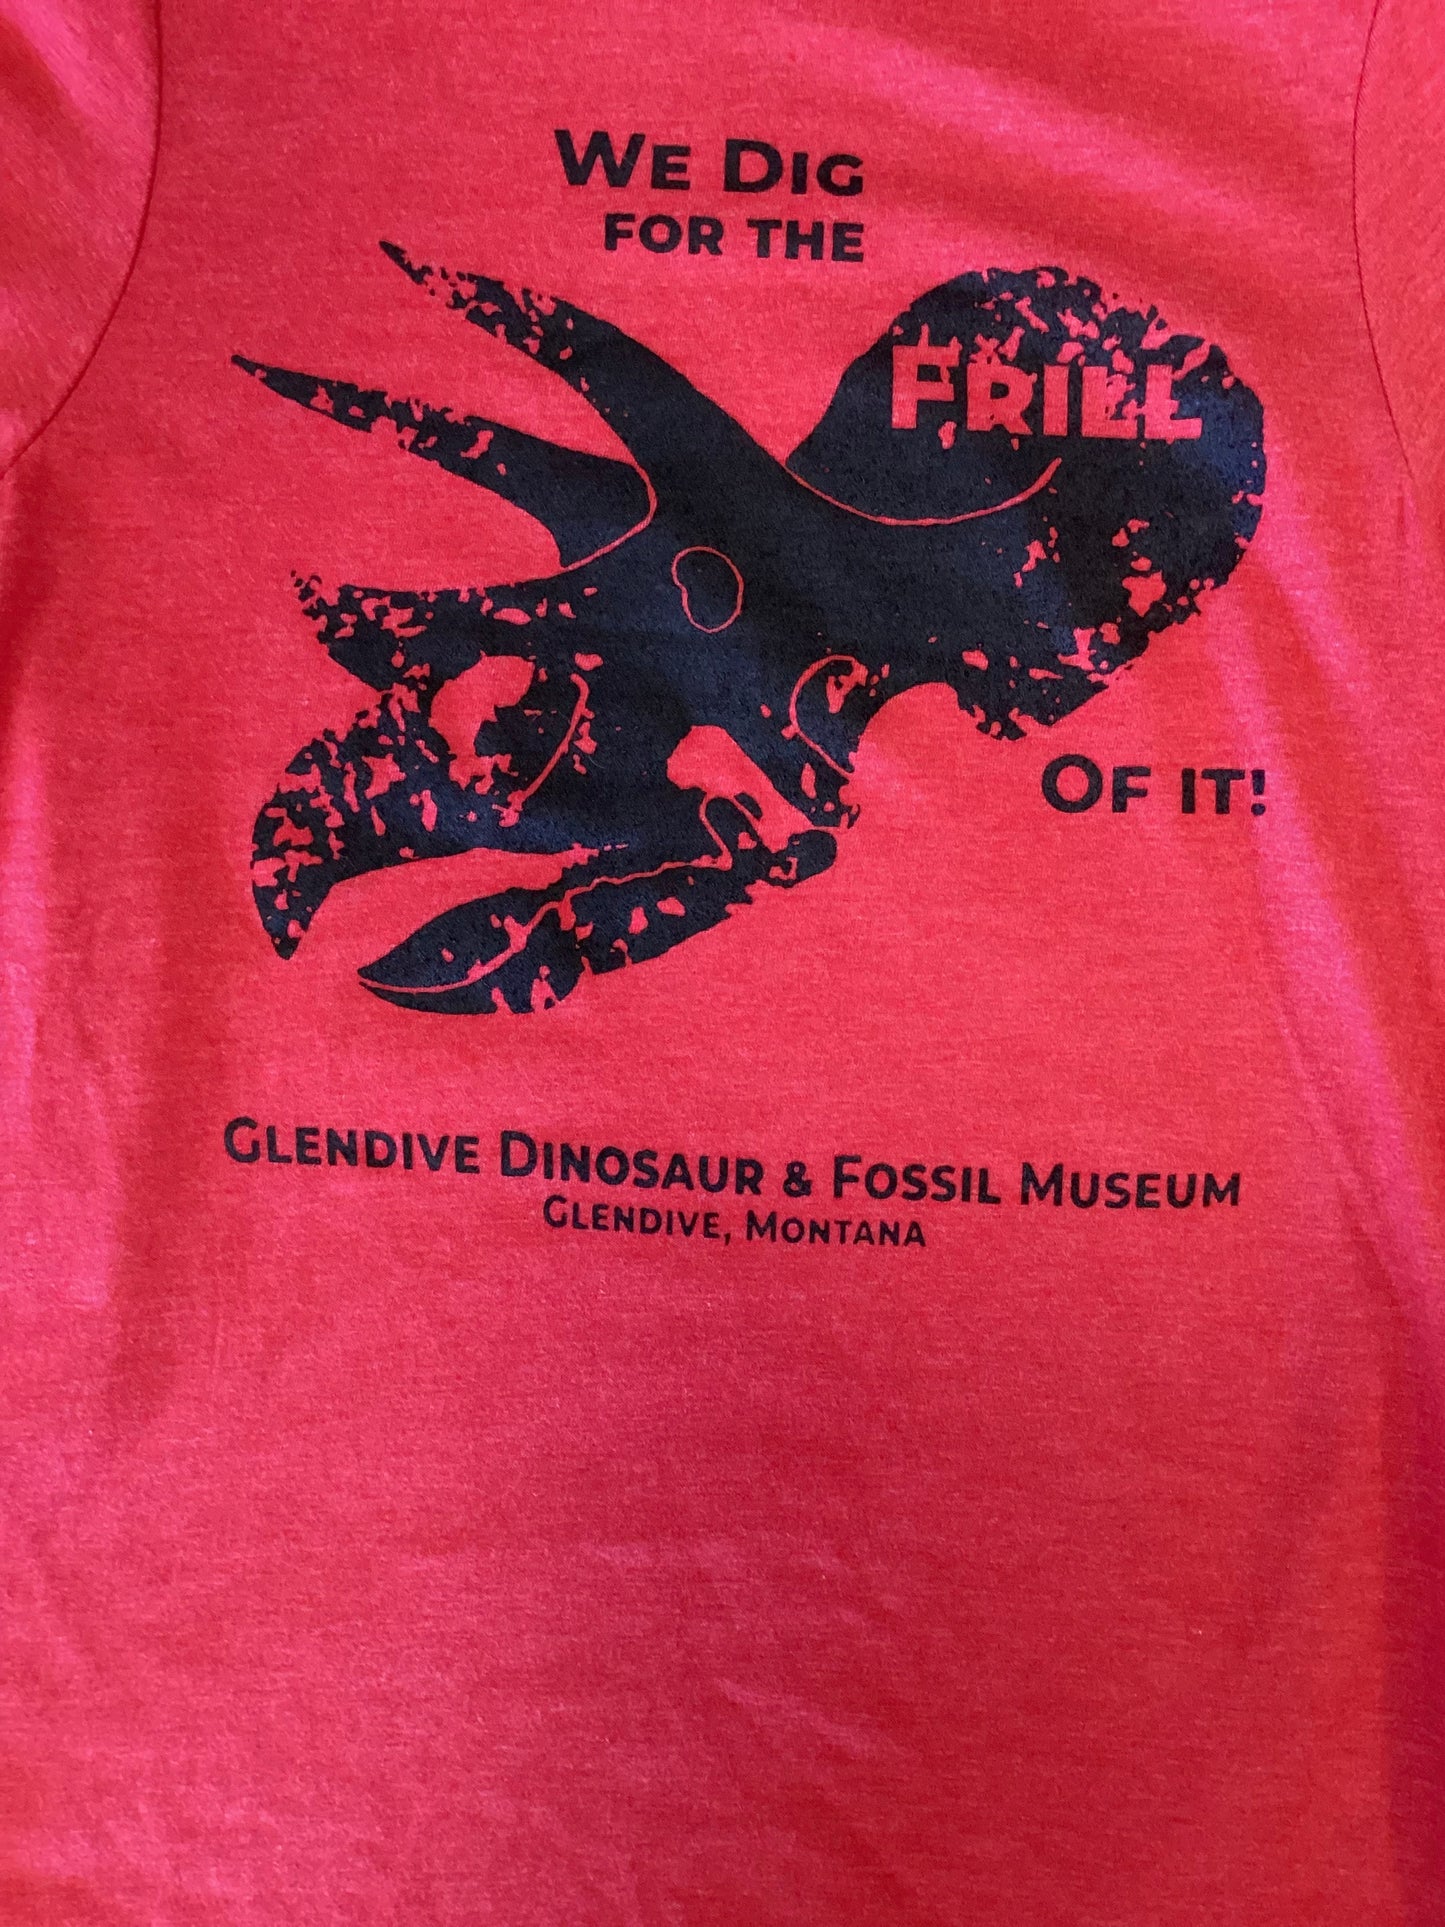 "For the Frill of It" T-shirt